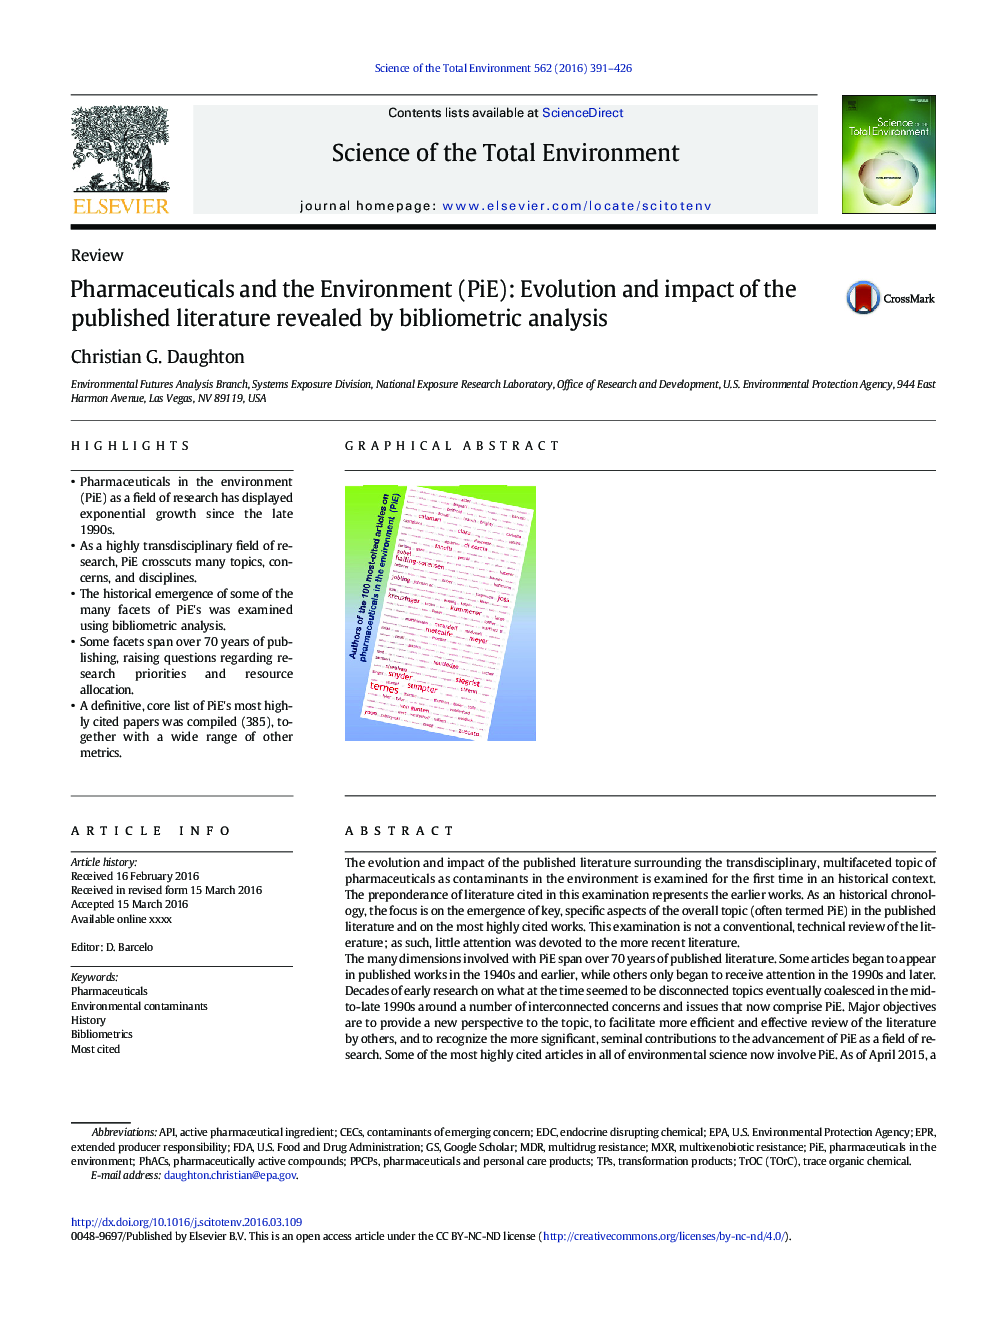 Pharmaceuticals and the Environment (PiE): Evolution and impact of the published literature revealed by bibliometric analysis